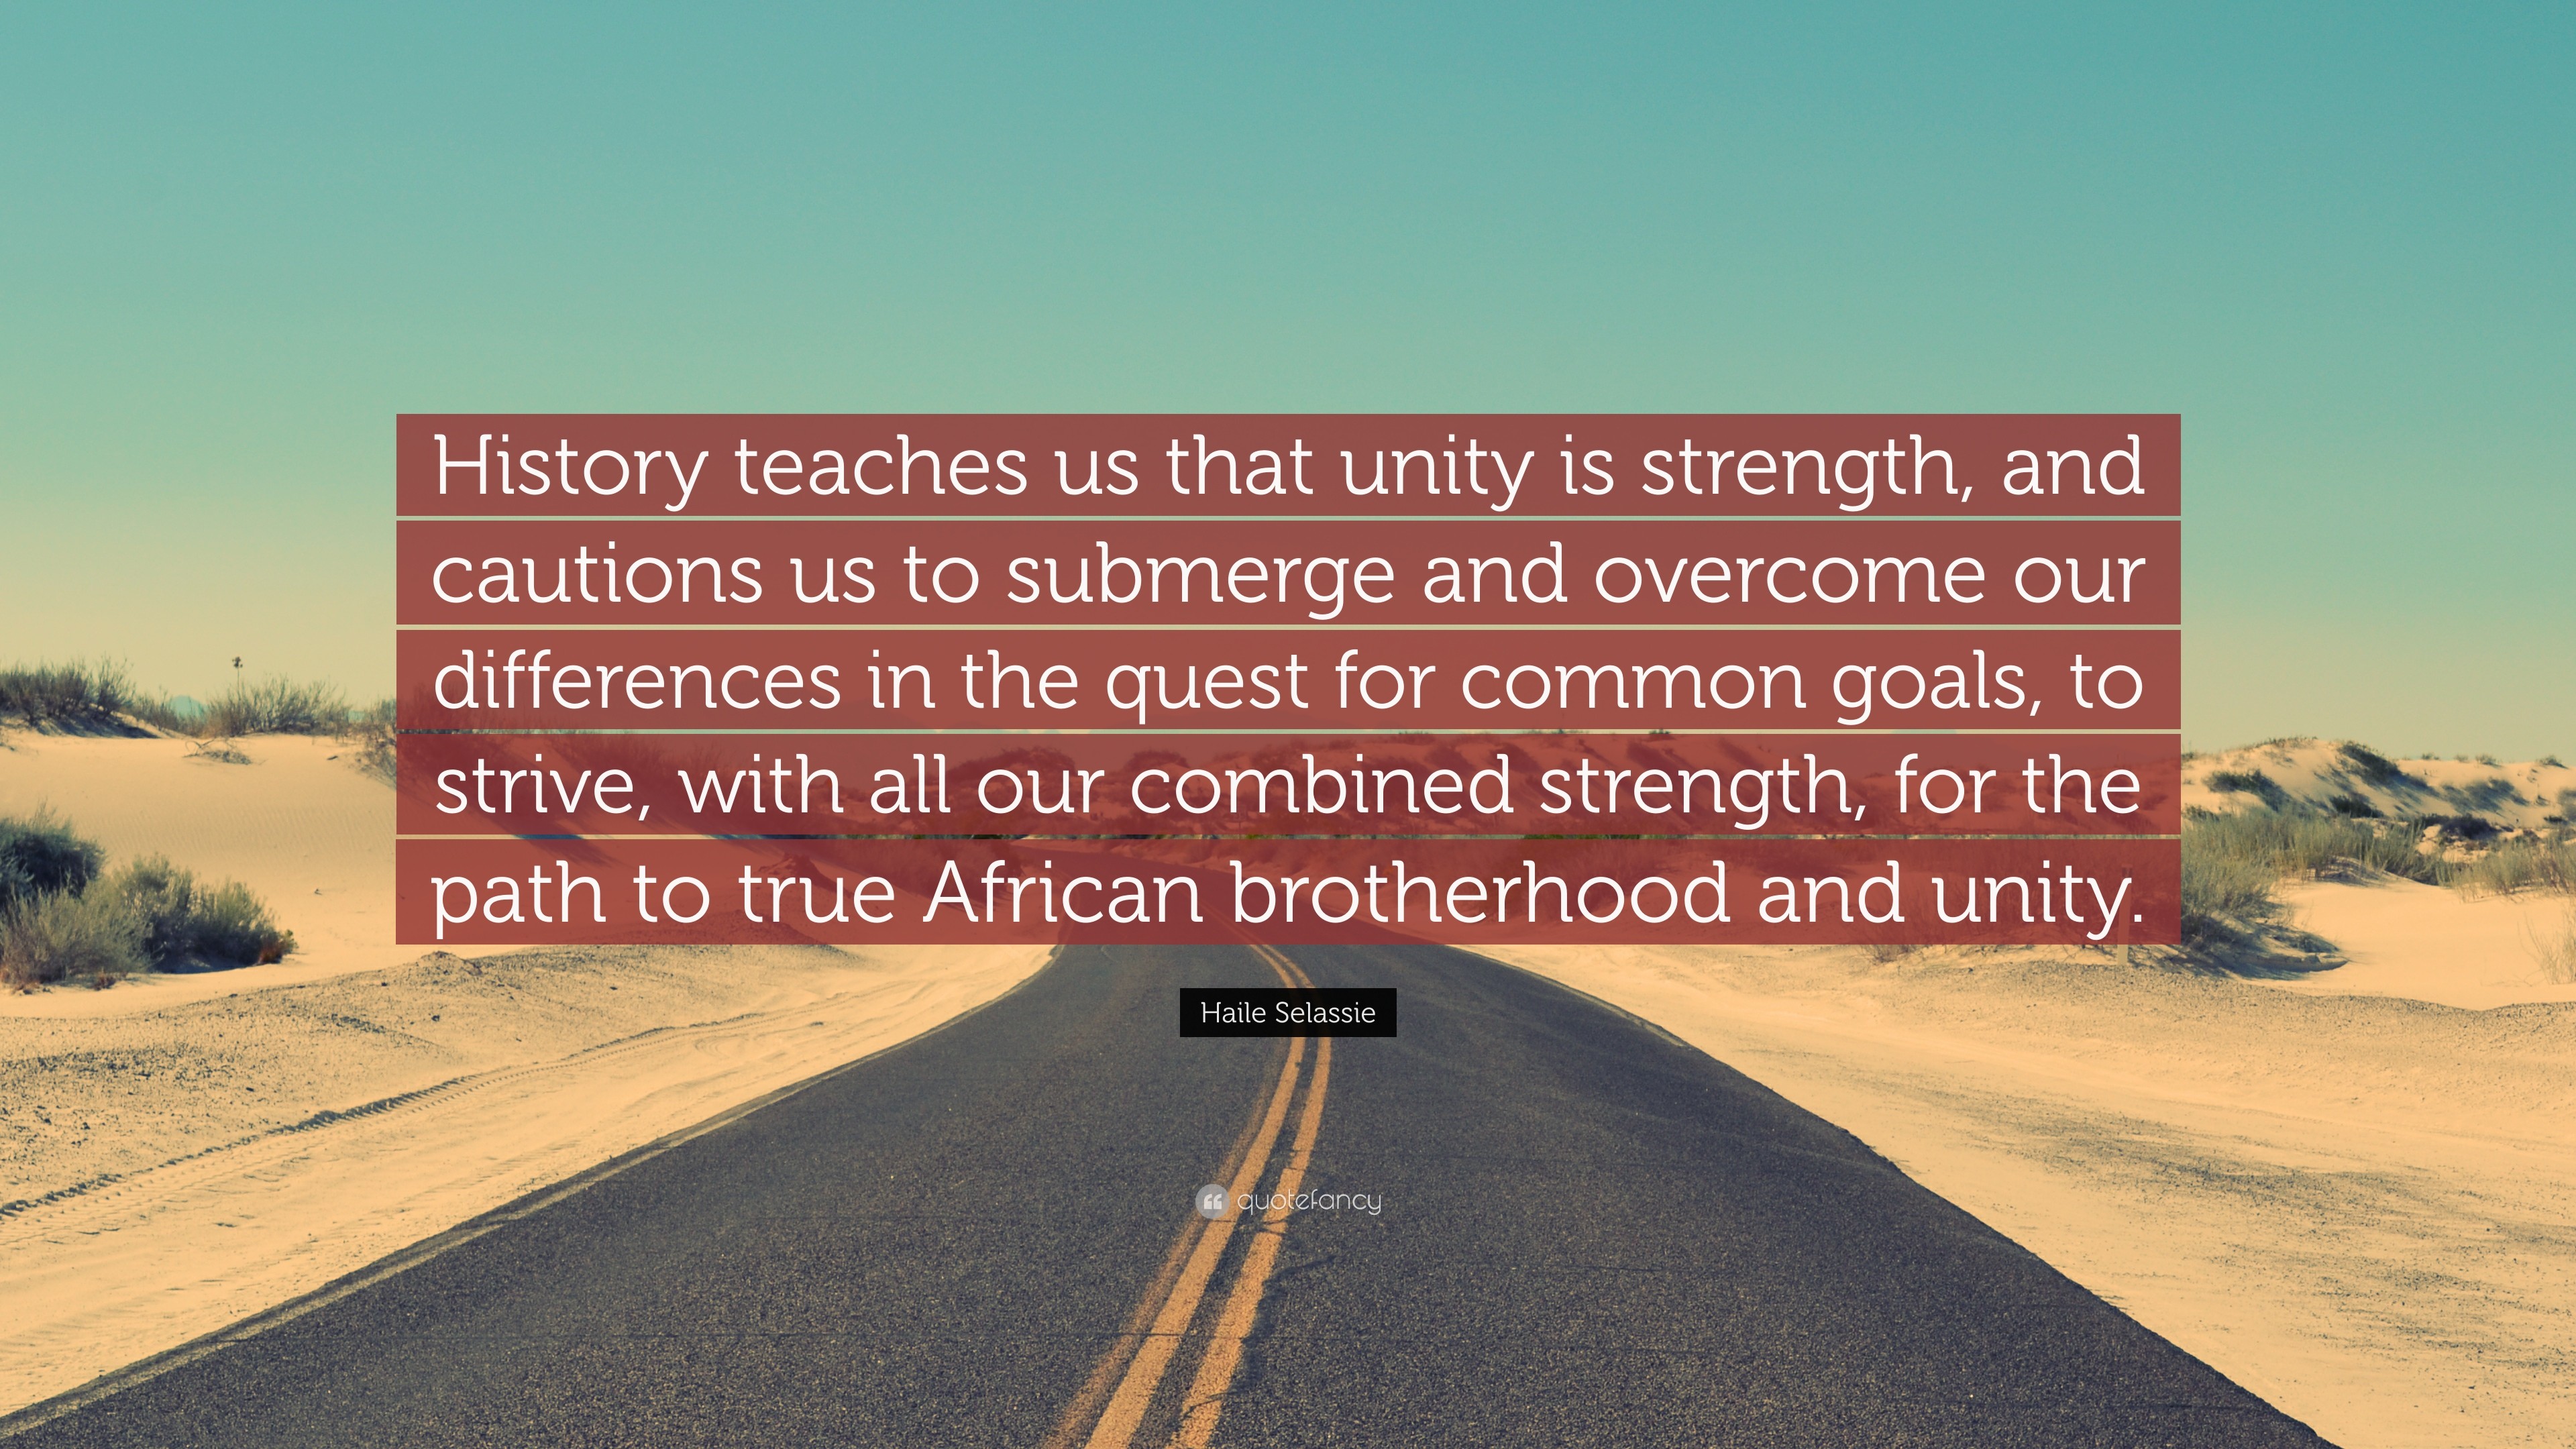 3840x2160 Haile Selassie Quote: “History teaches us that unity is strength, and  cautions us